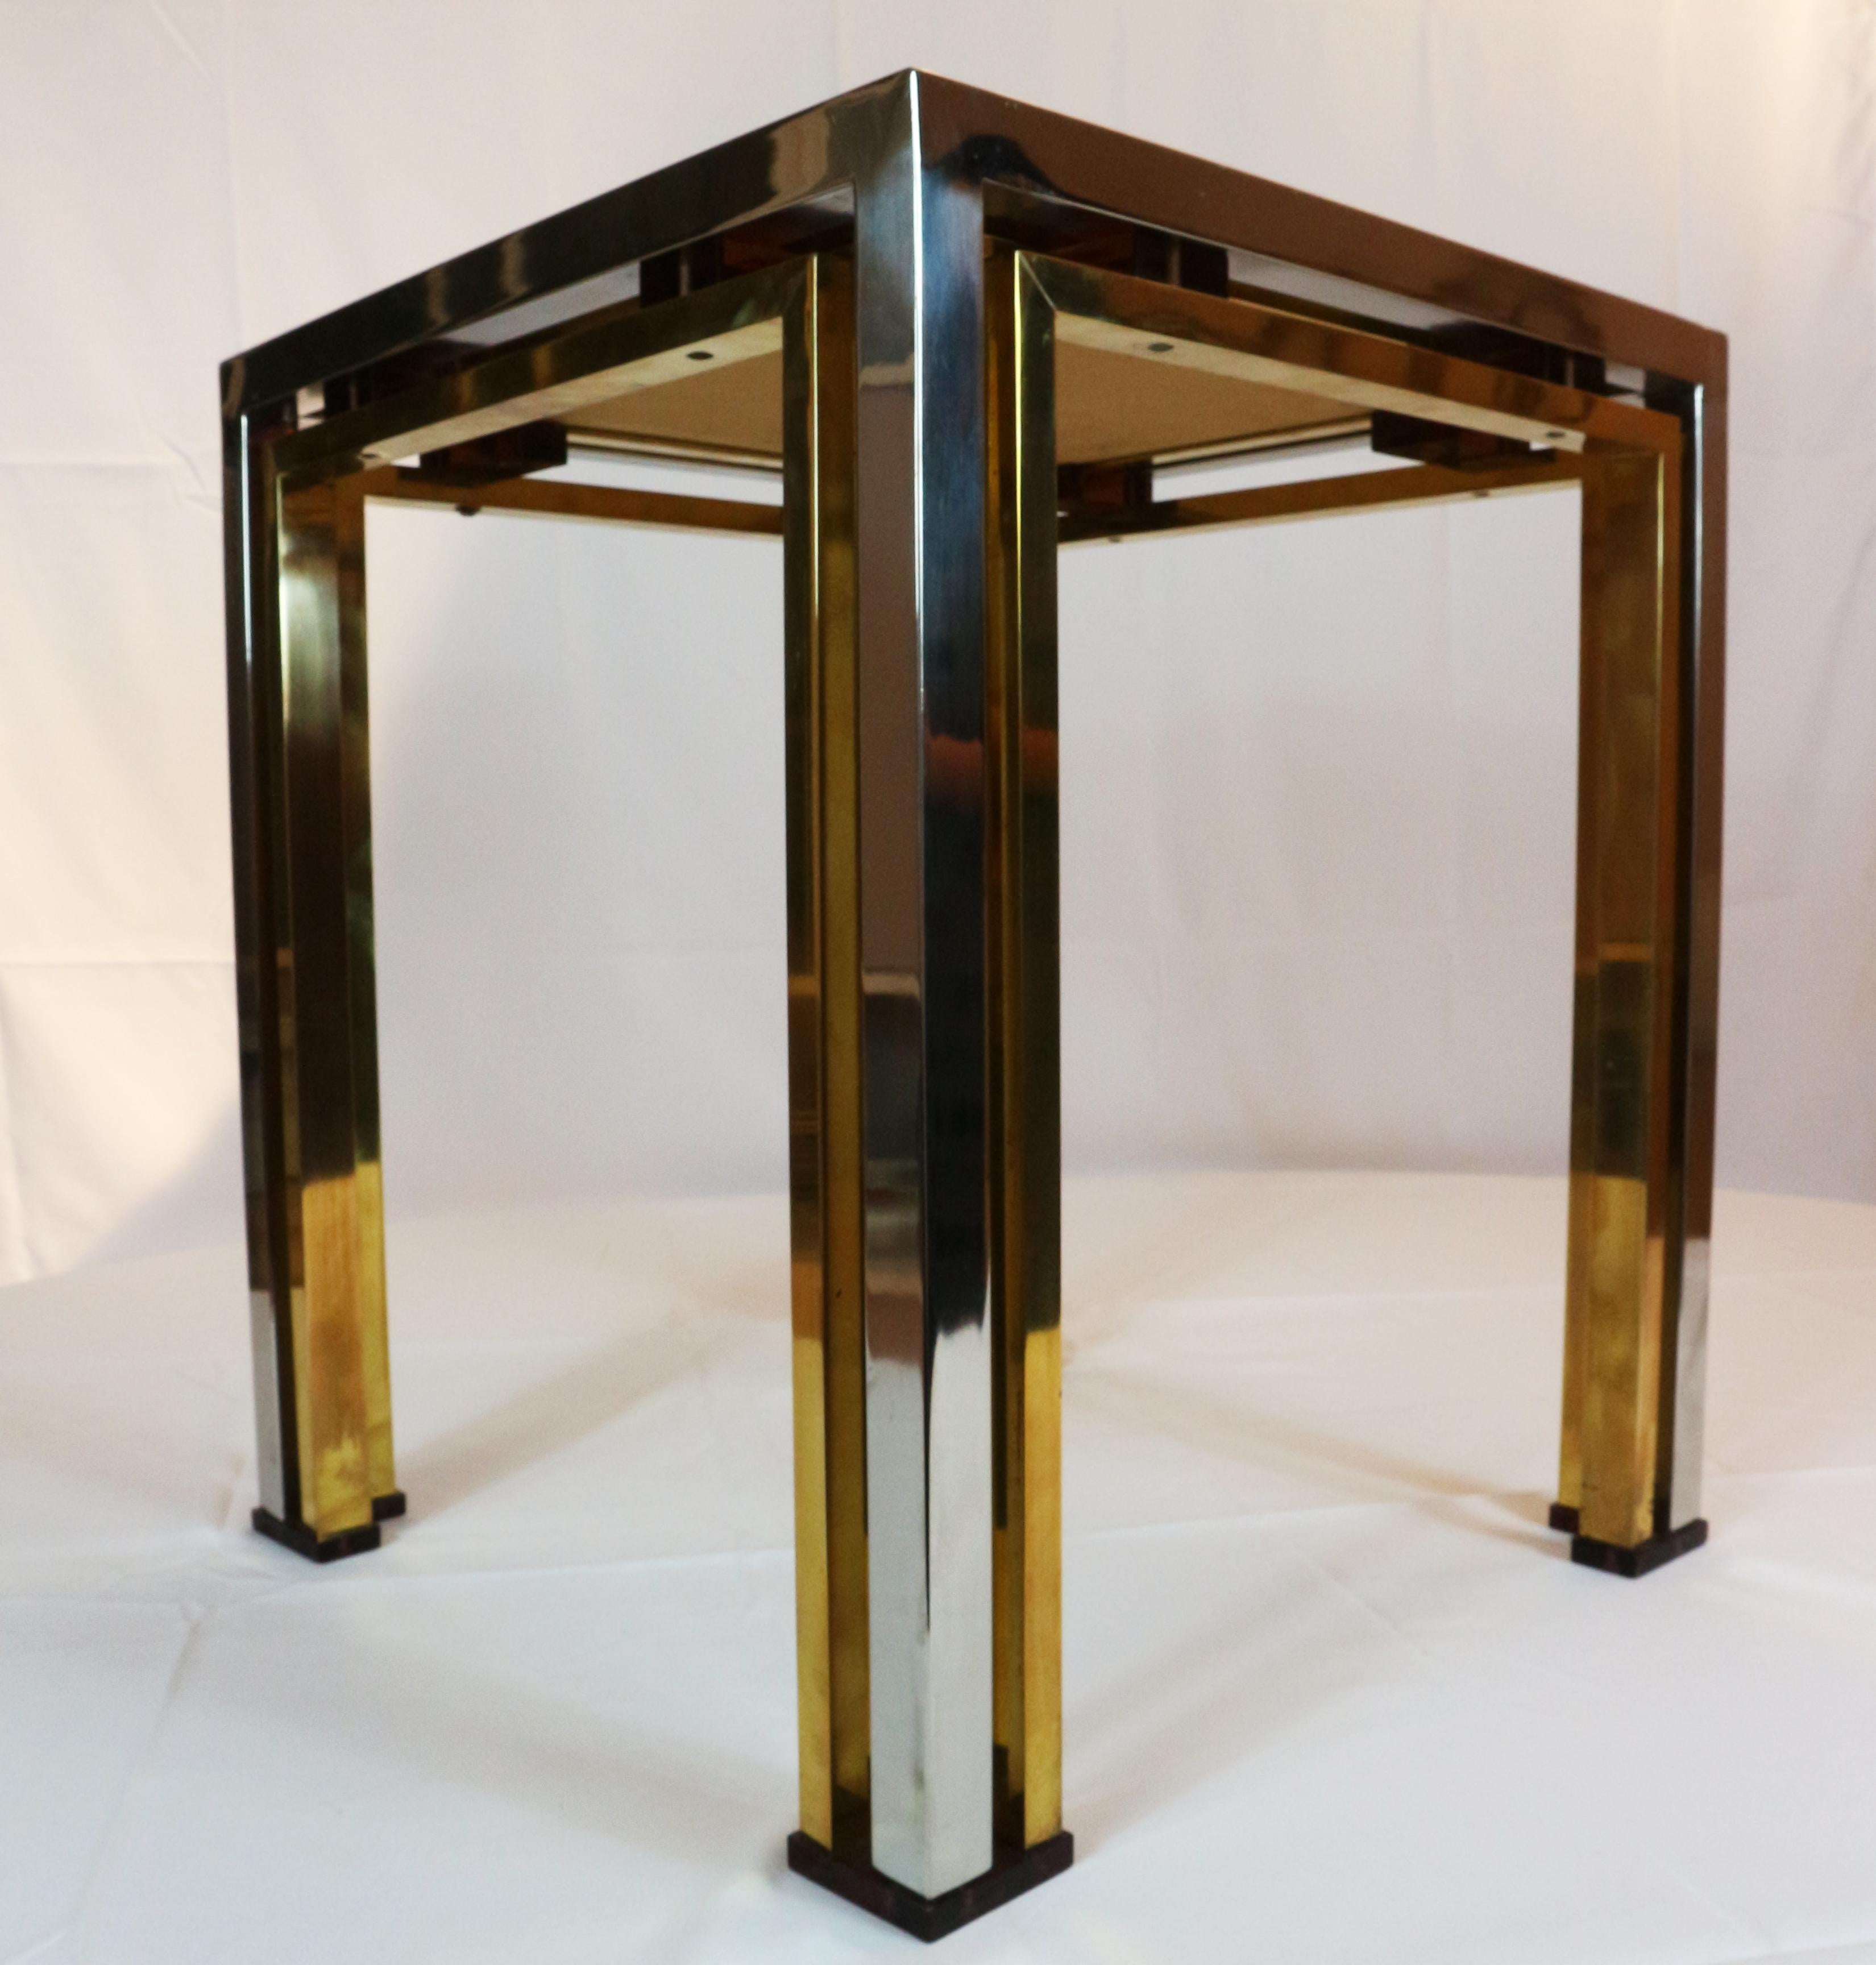 Mid-Century Modern square shaped coffee table by designer Rome Rega, Italy, 1970s

The sculptural chrome and brass frame is contrasting nicely with the acid treated
glass top which is held in place with purple perspex details.